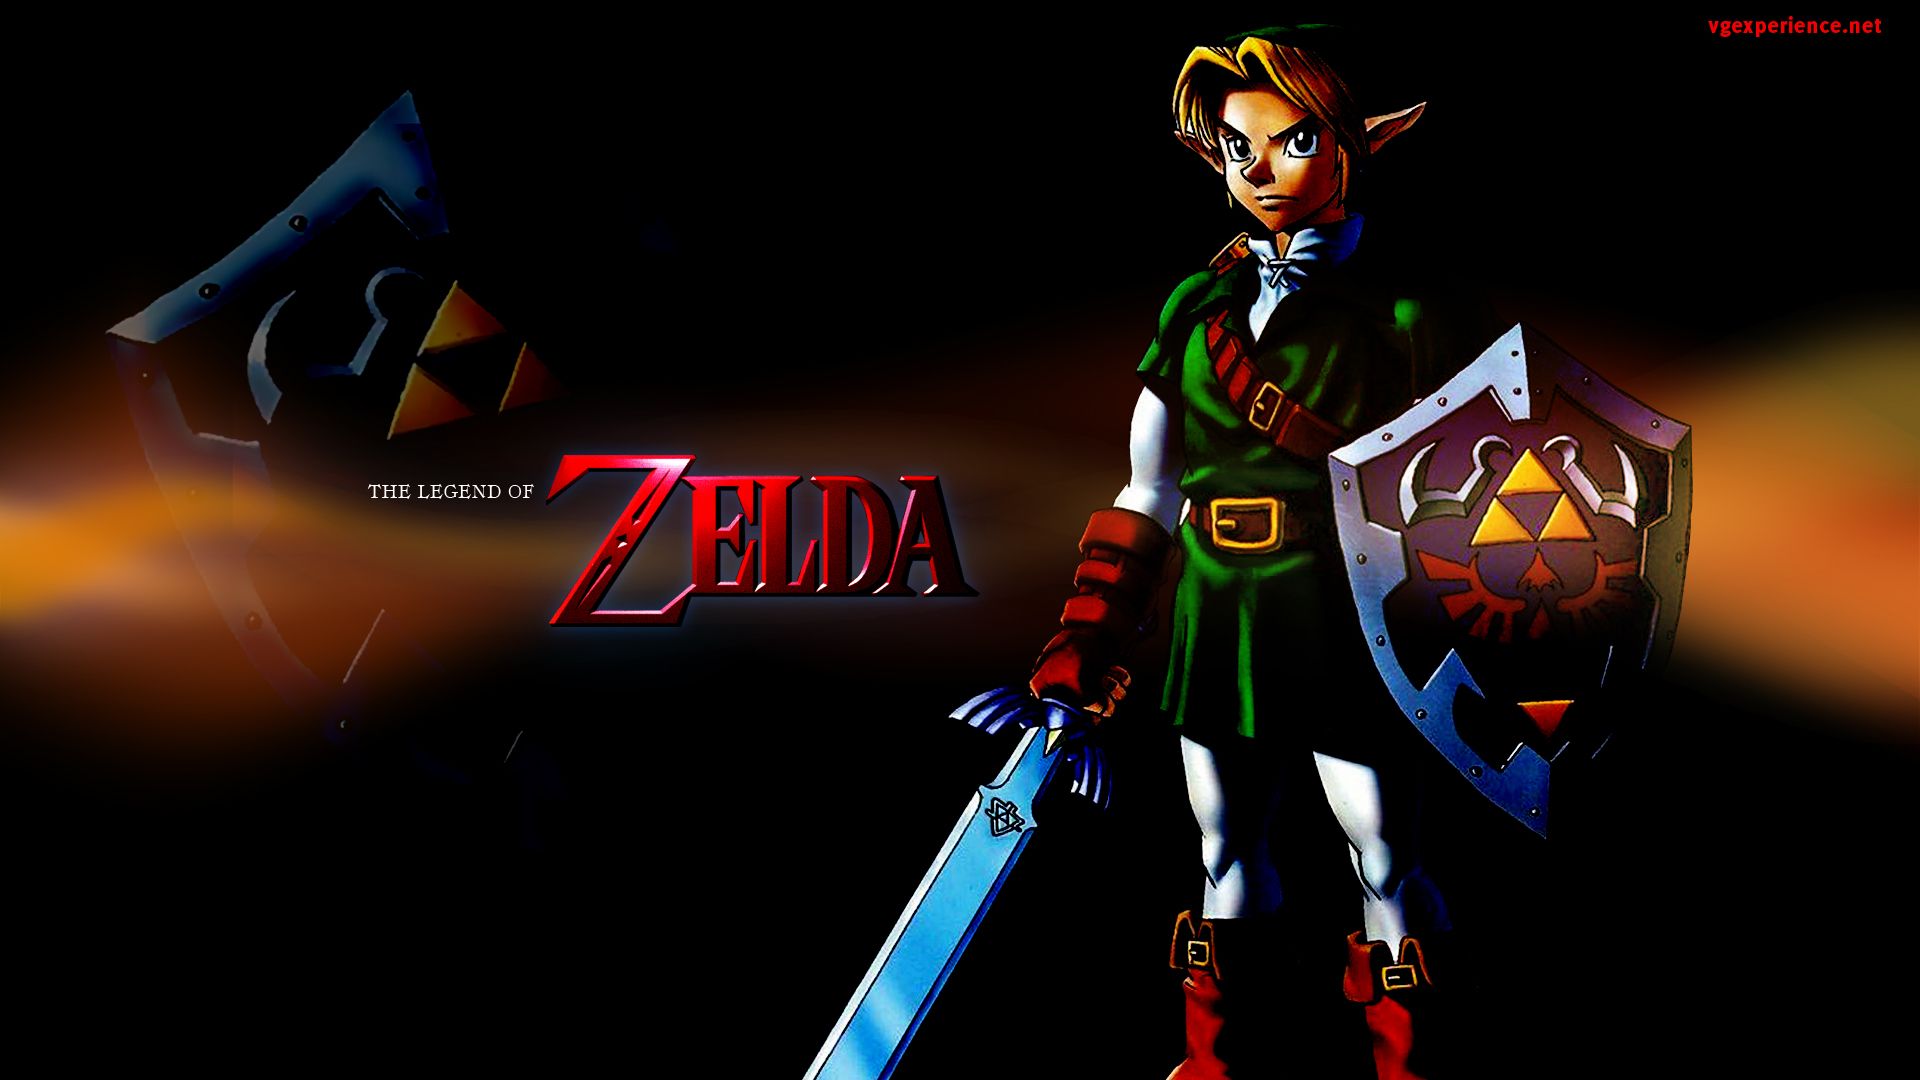 Title Video Game The Legend Of Zelda Ocarina Of Time N64 1080p HD Wallpaper